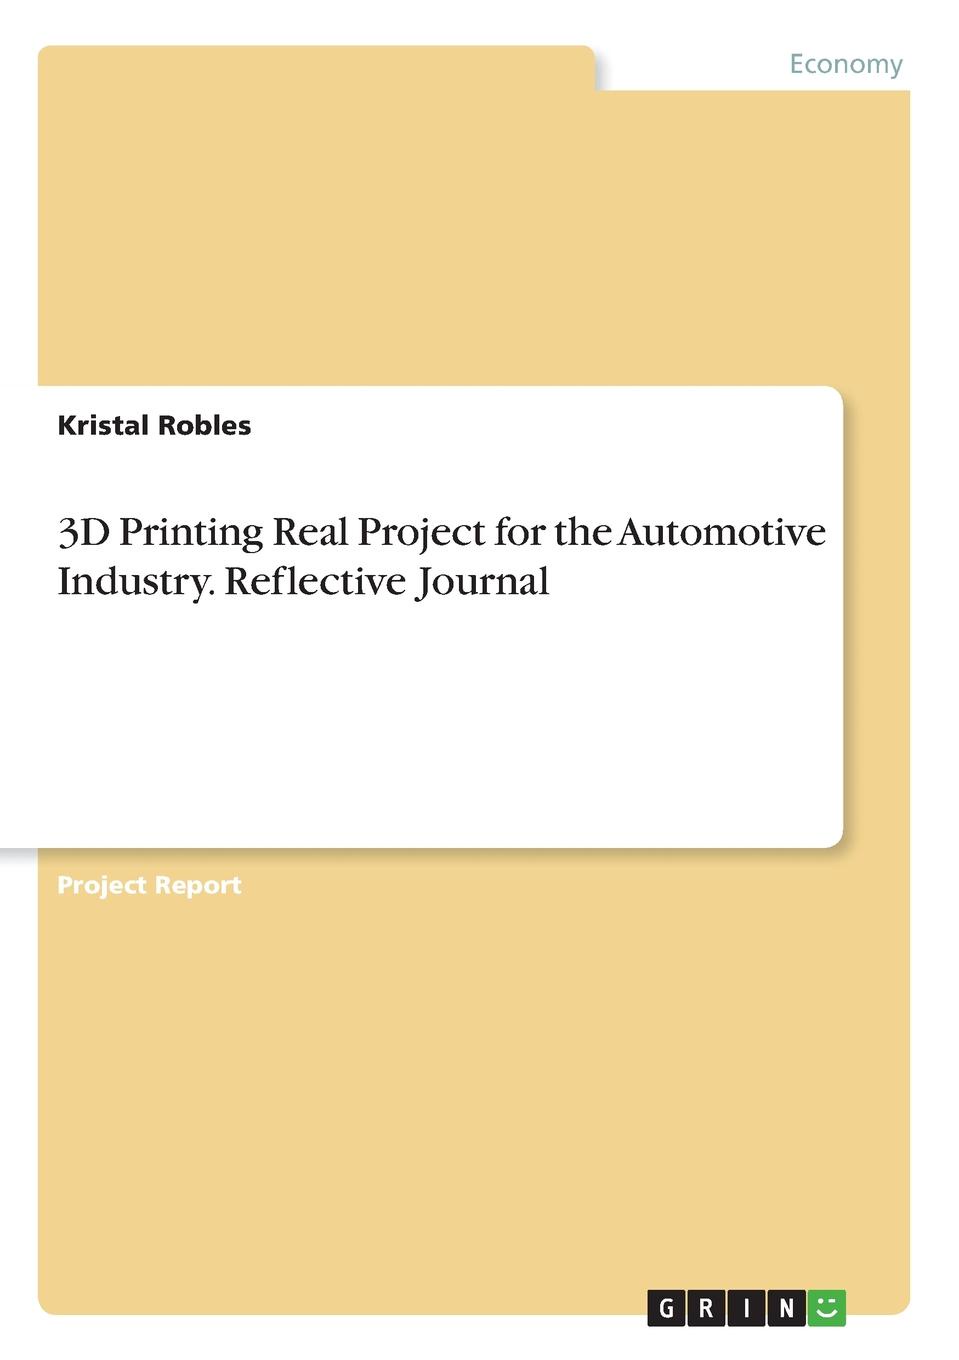 фото 3D Printing Real Project for the Automotive Industry. Reflective Journal